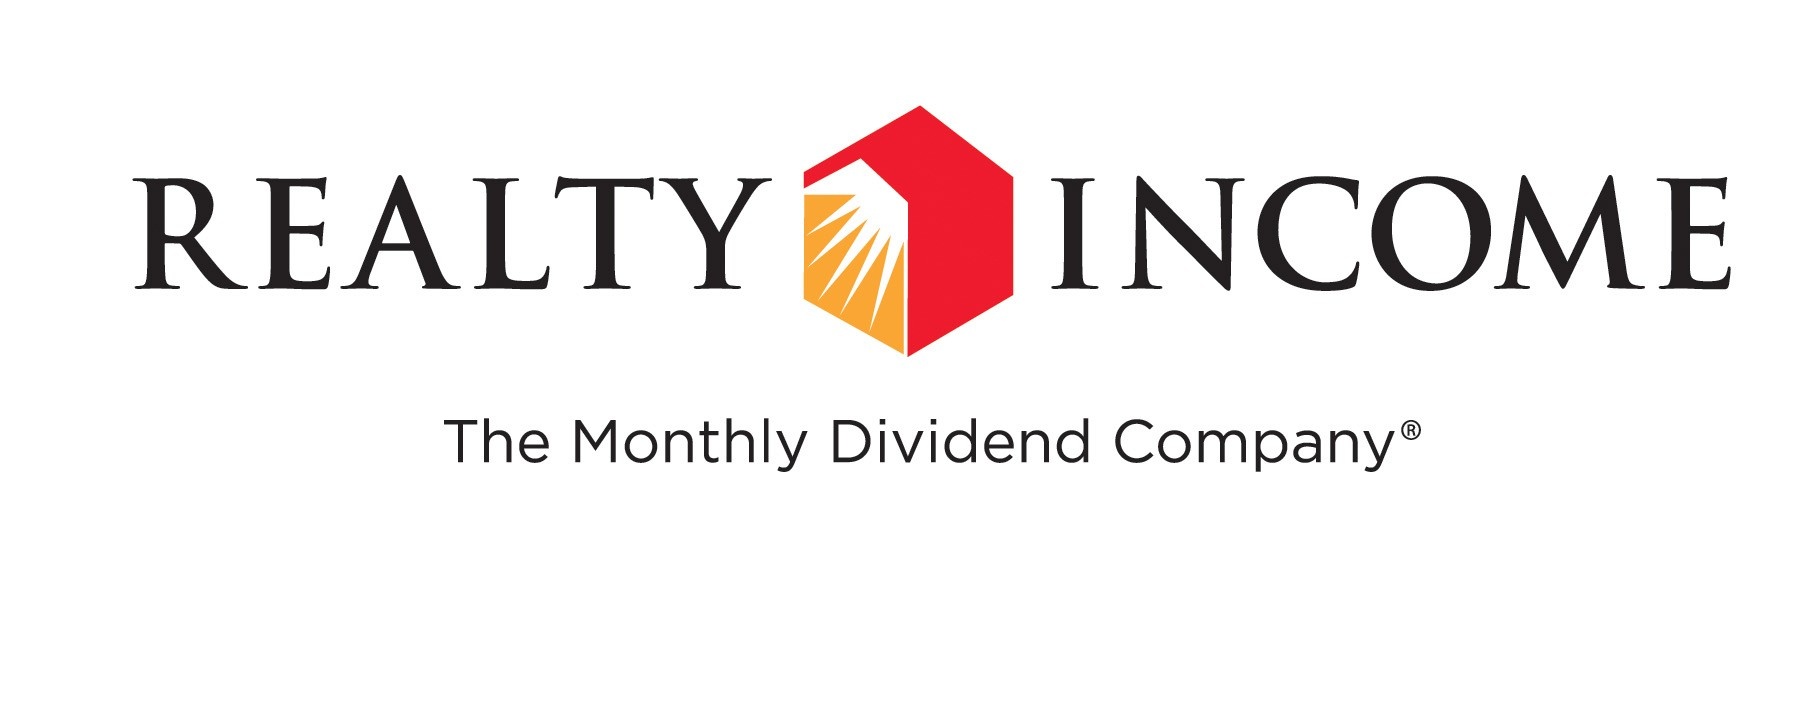 Realty Income hikes dividend by 2.2%